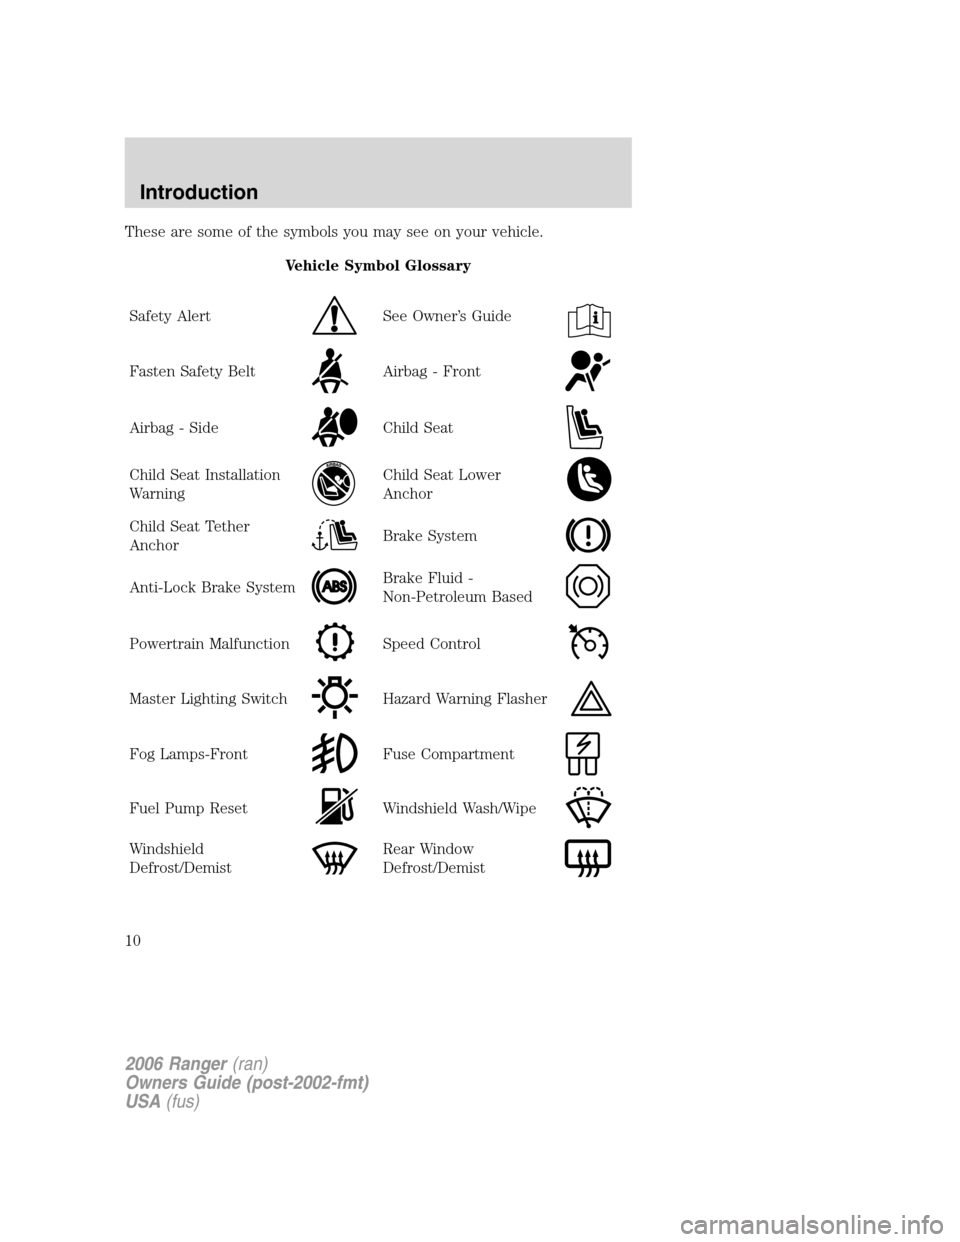 FORD RANGER 2006 2.G Owners Manual These are some of the symbols you may see on your vehicle.
Vehicle Symbol Glossary
Safety Alert
See Owner’s Guide
Fasten Safety BeltAirbag - Front
Airbag - SideChild Seat
Child Seat Installation
War